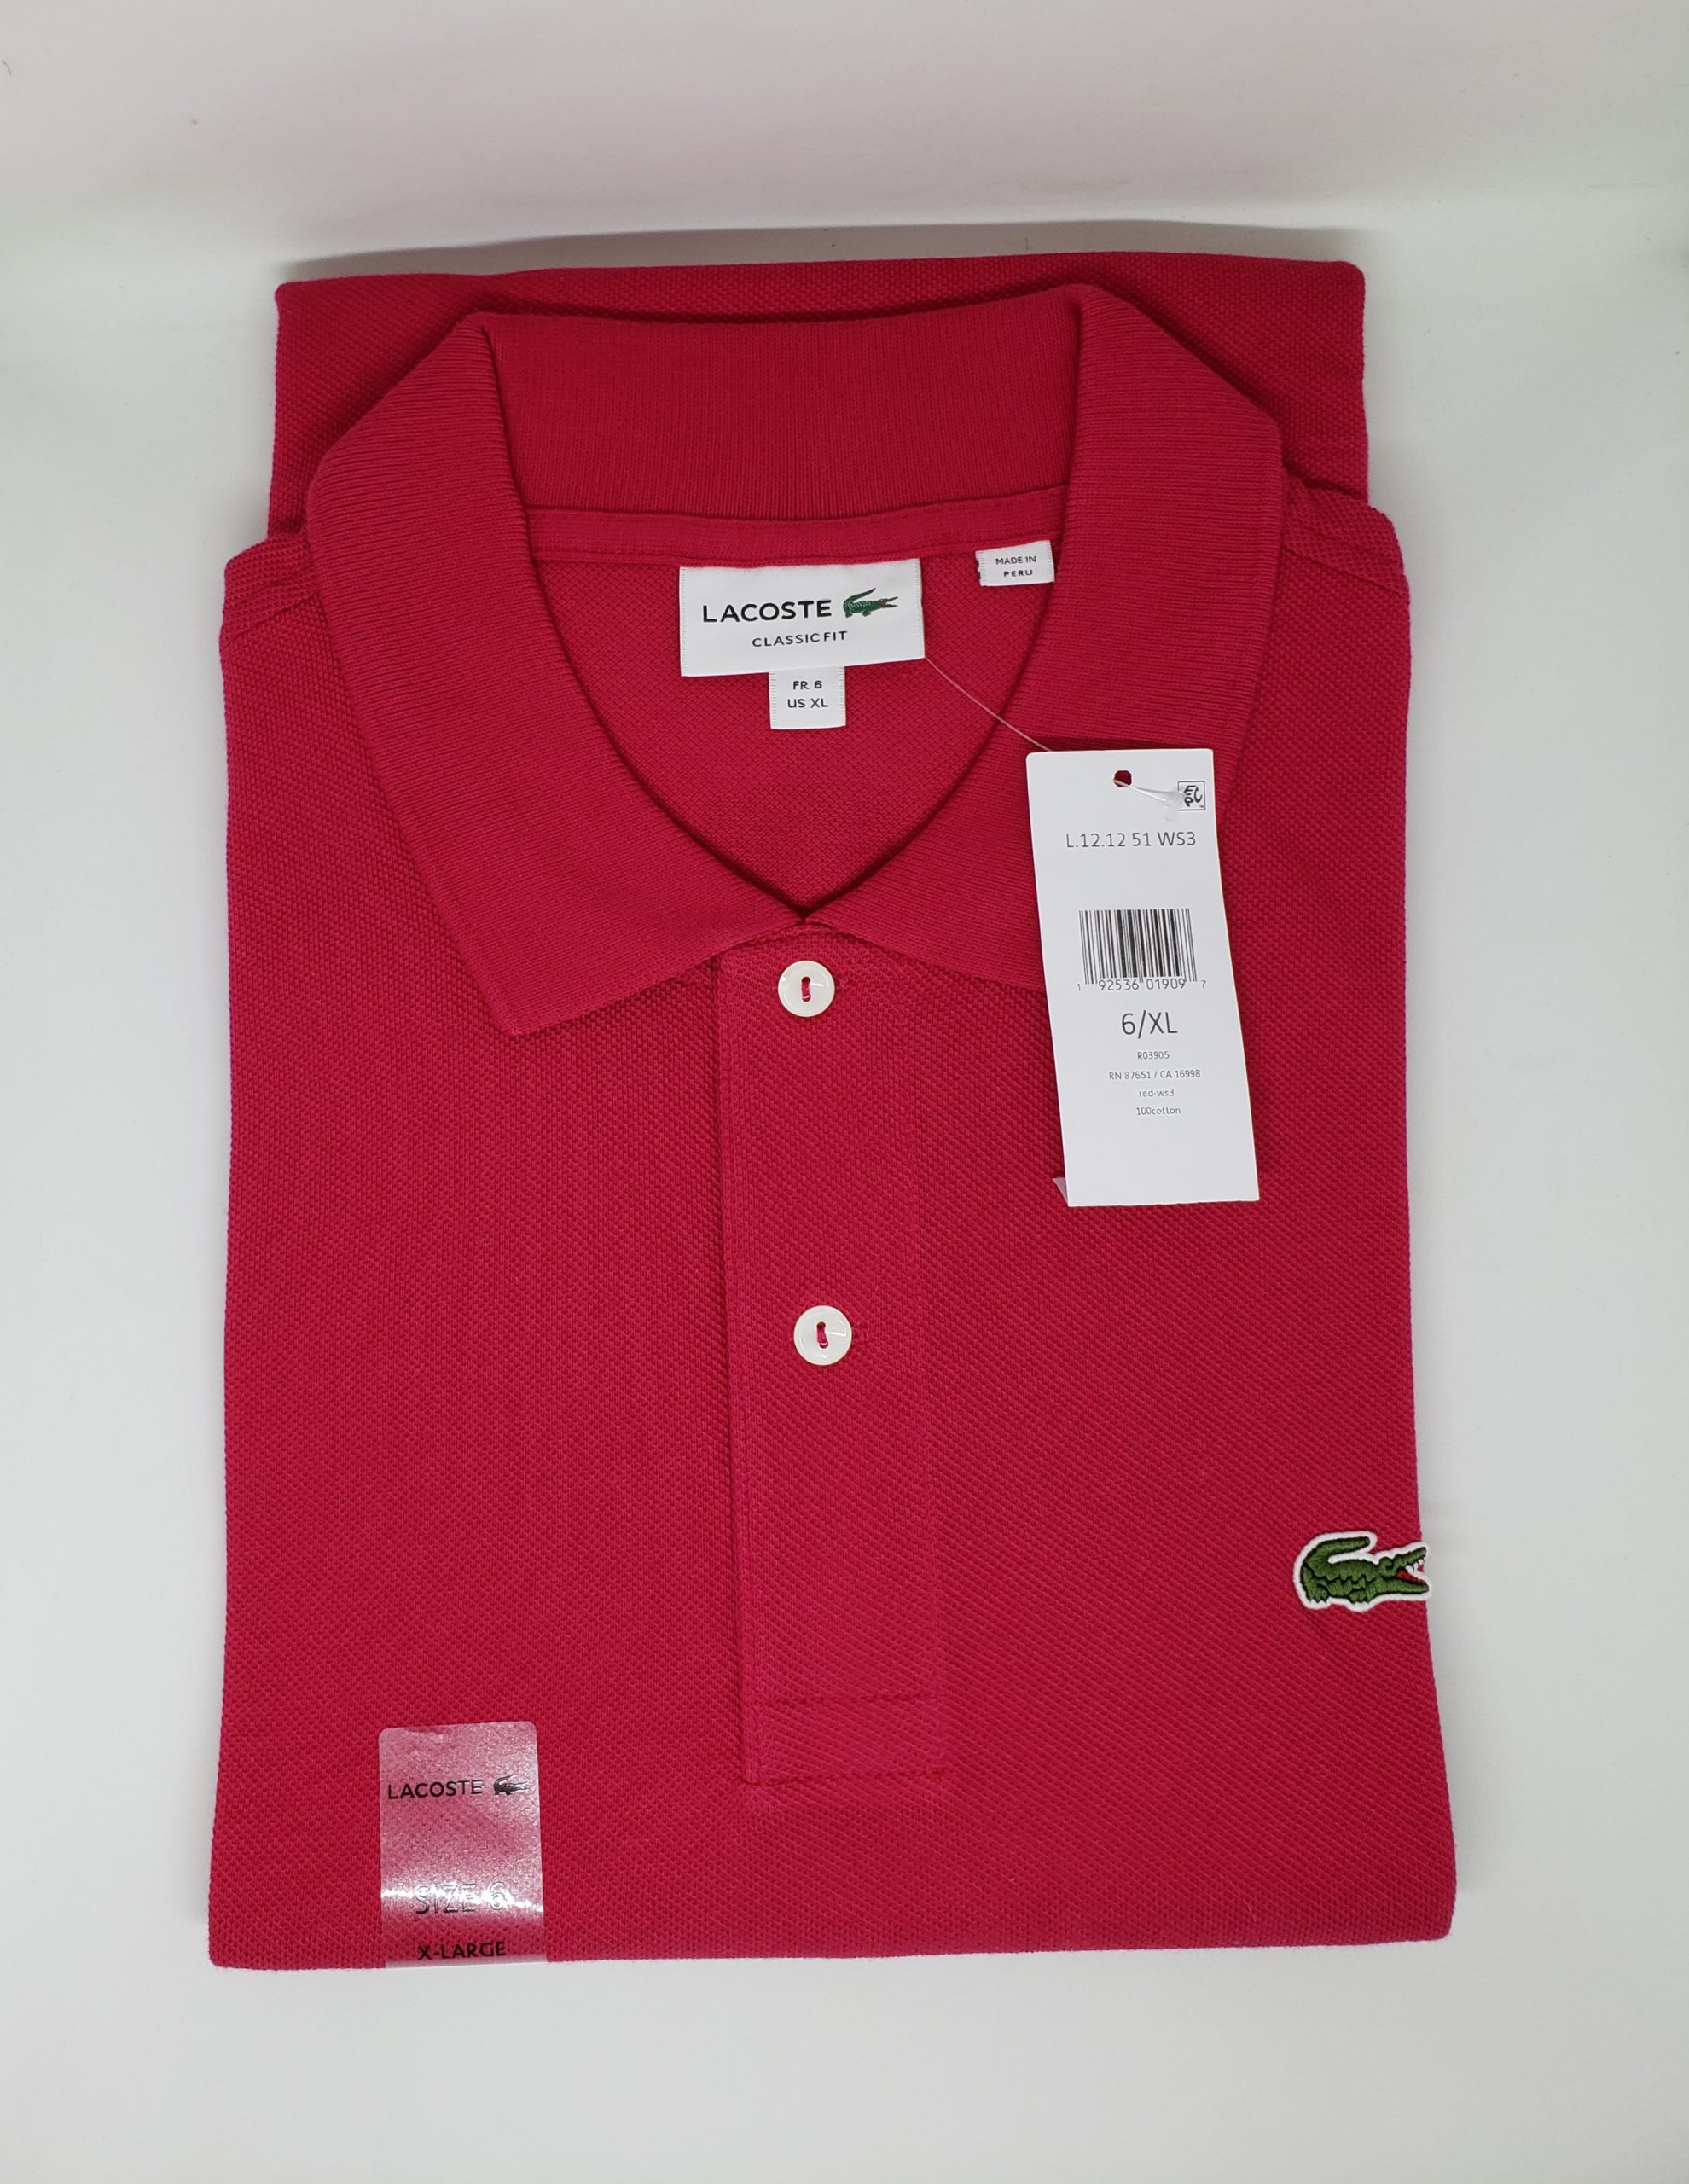 Lacoste Clasic Fit Polo Shirts 100% cotton.